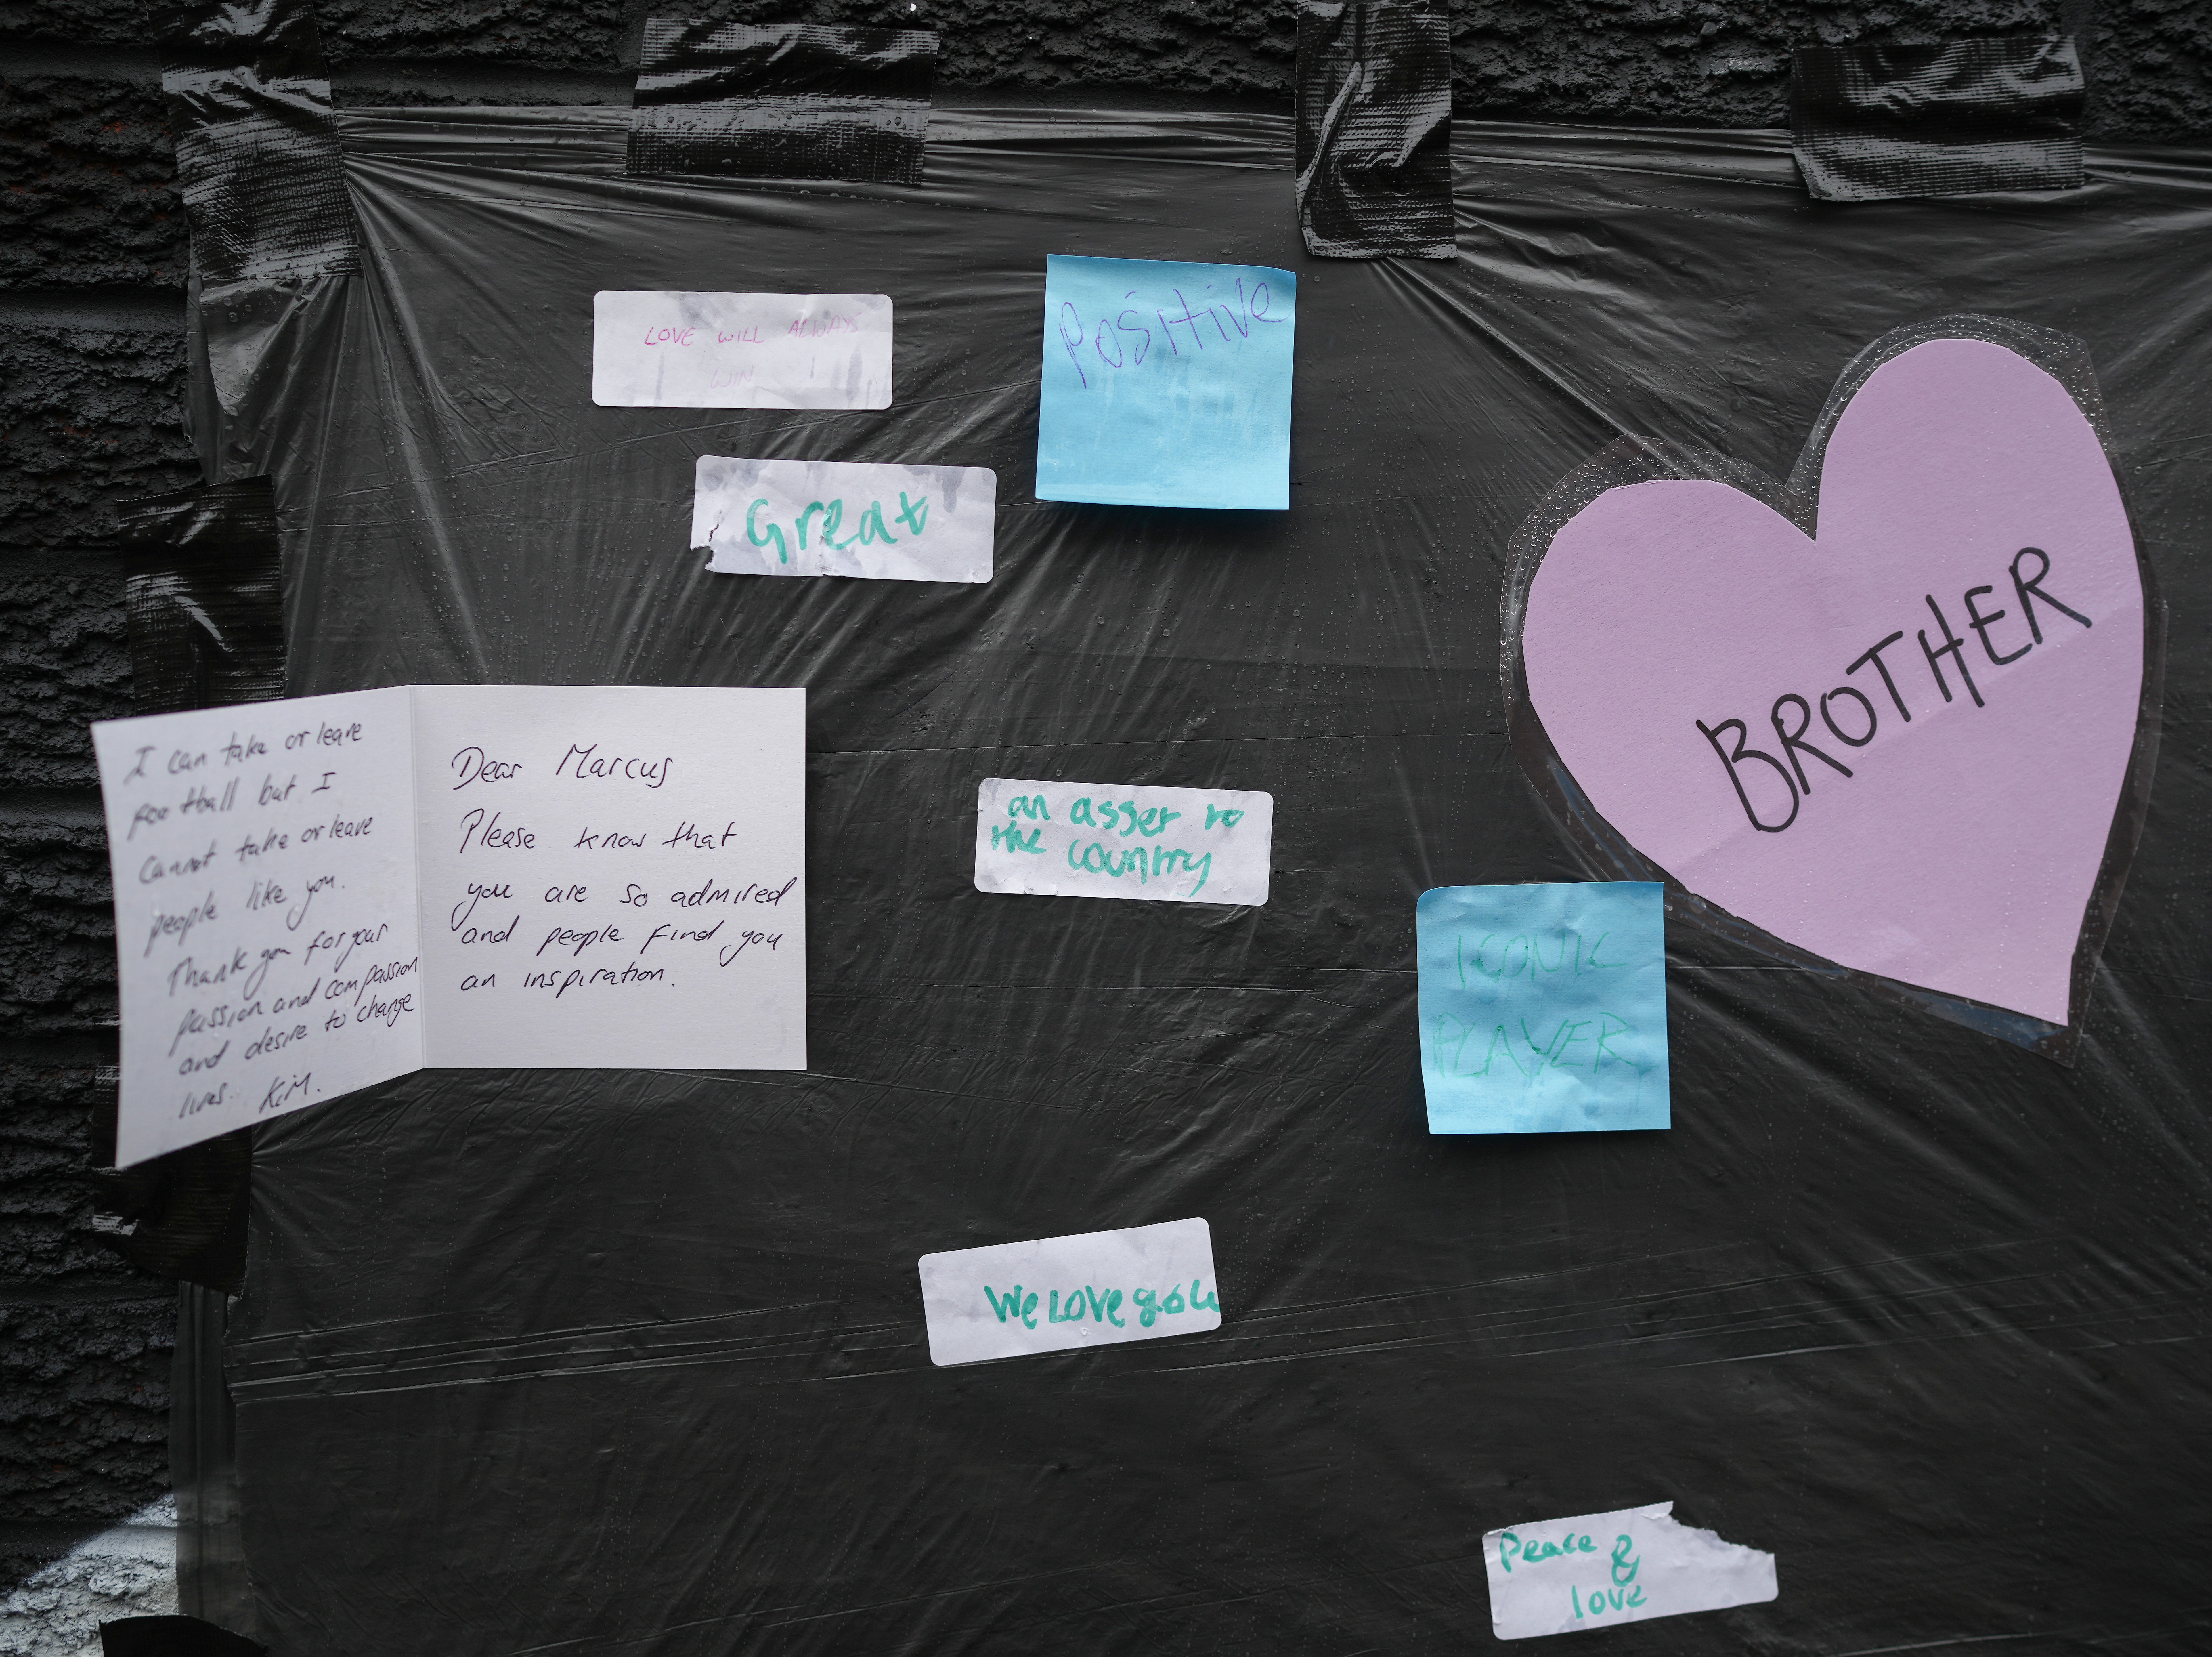 Some of the messages of support on the mural